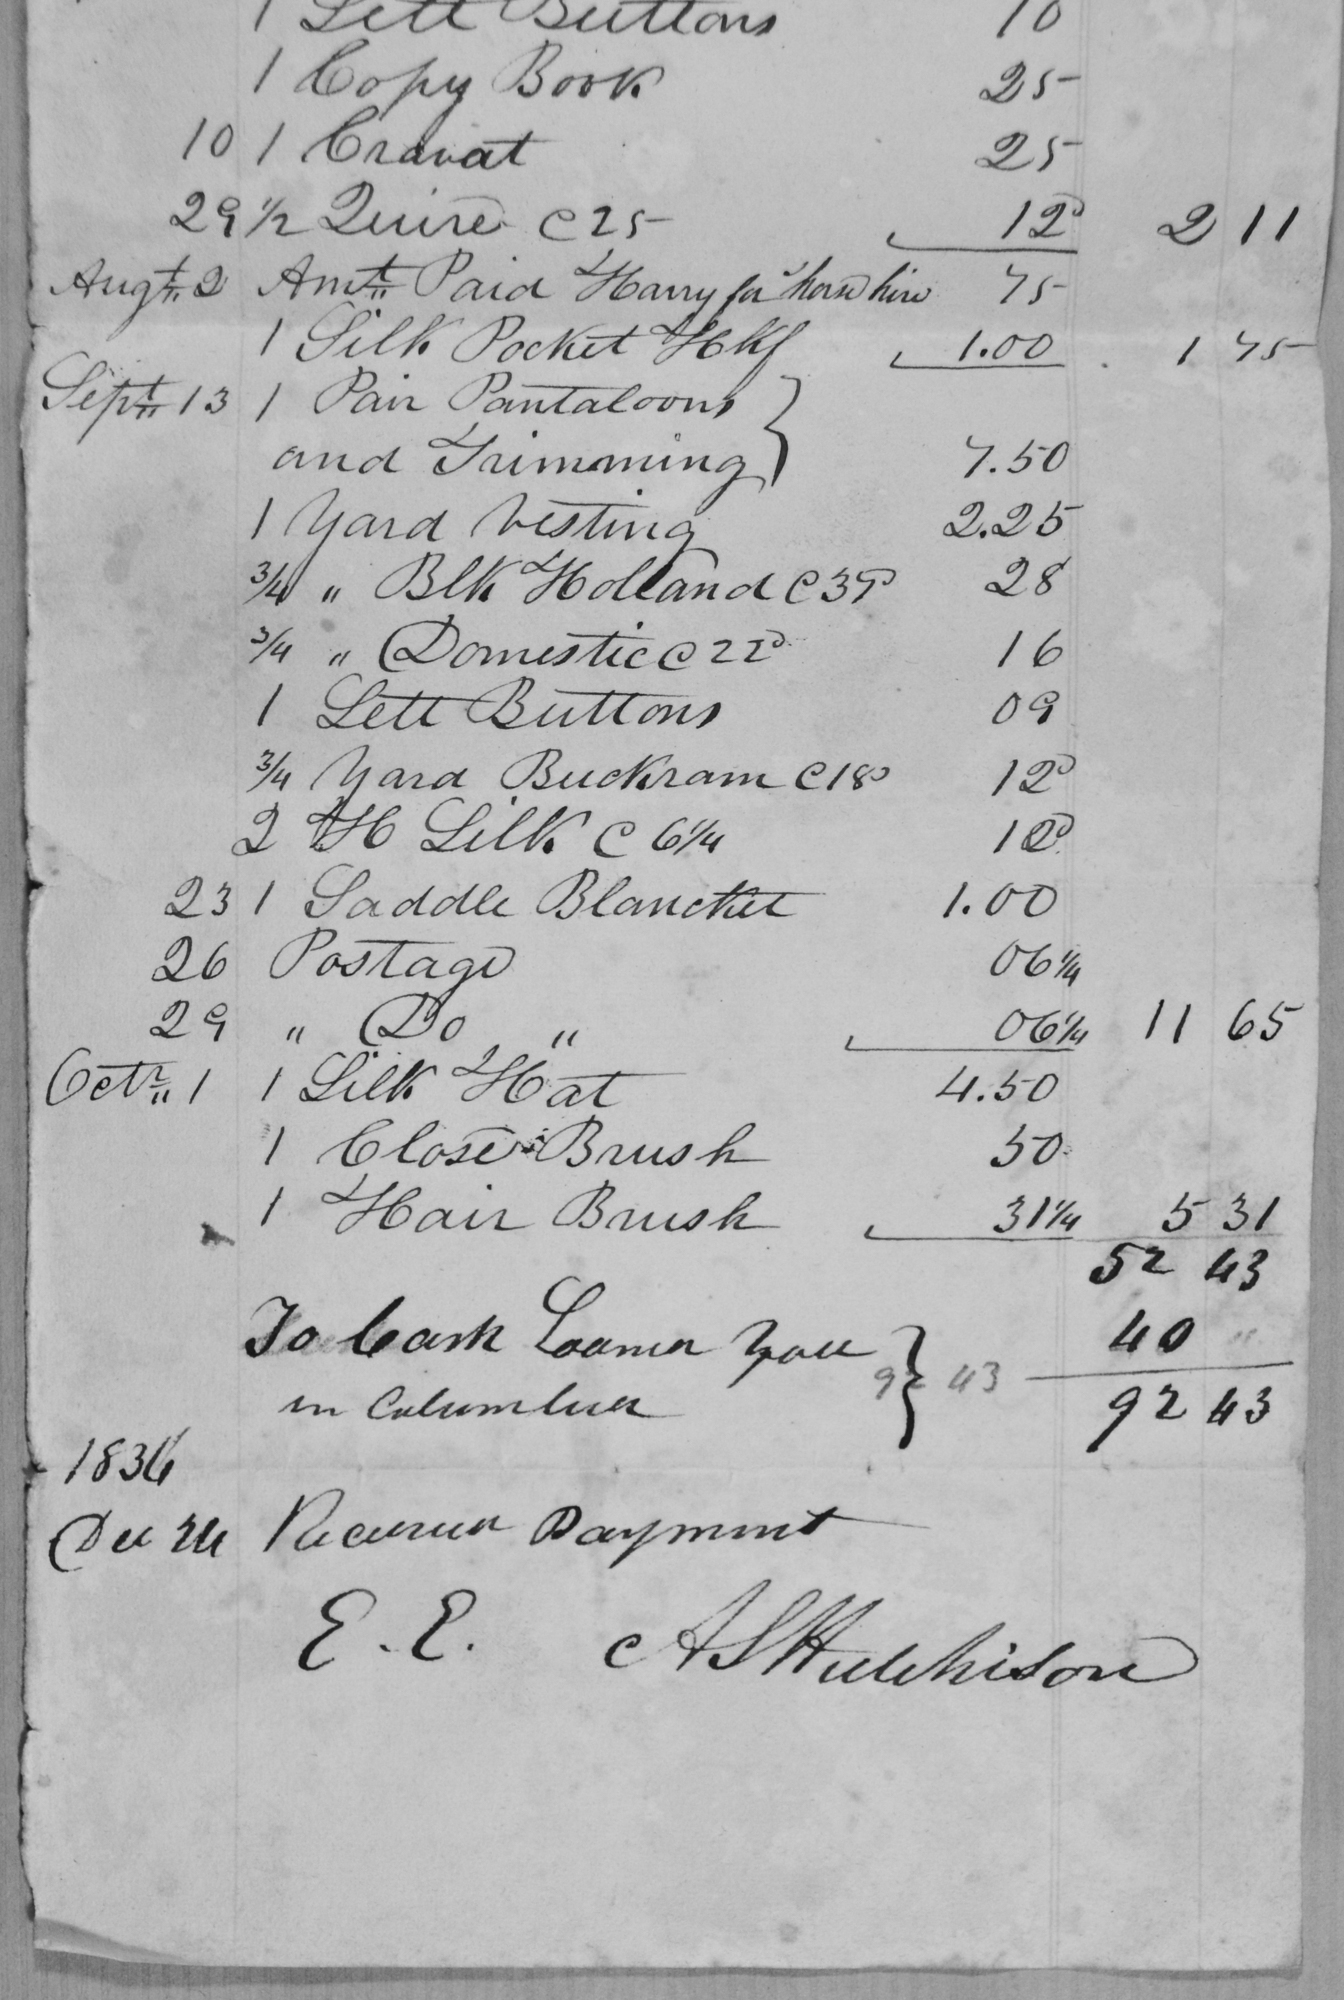 Bottom of account for N.B. Hutchison - 1835